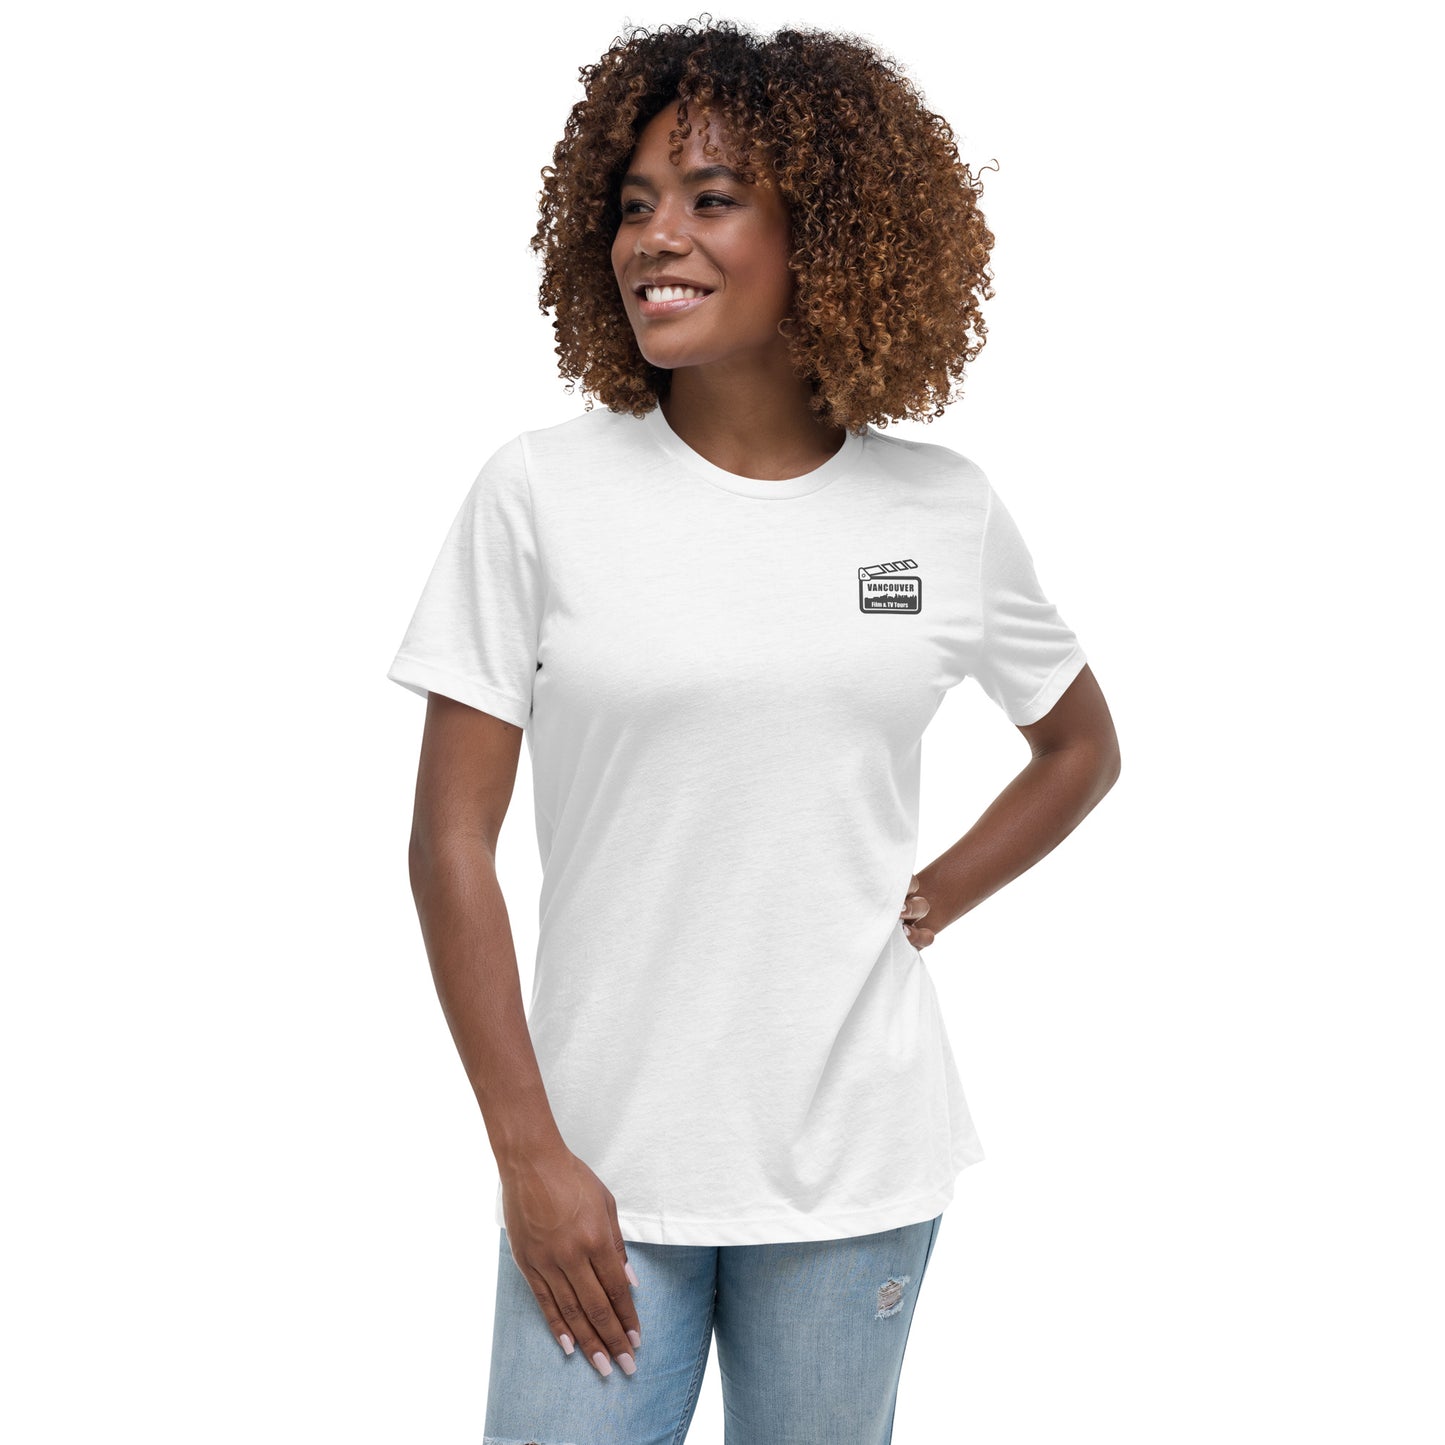 Vancouver Film & TV Tours: Women's Relaxed T-Shirt